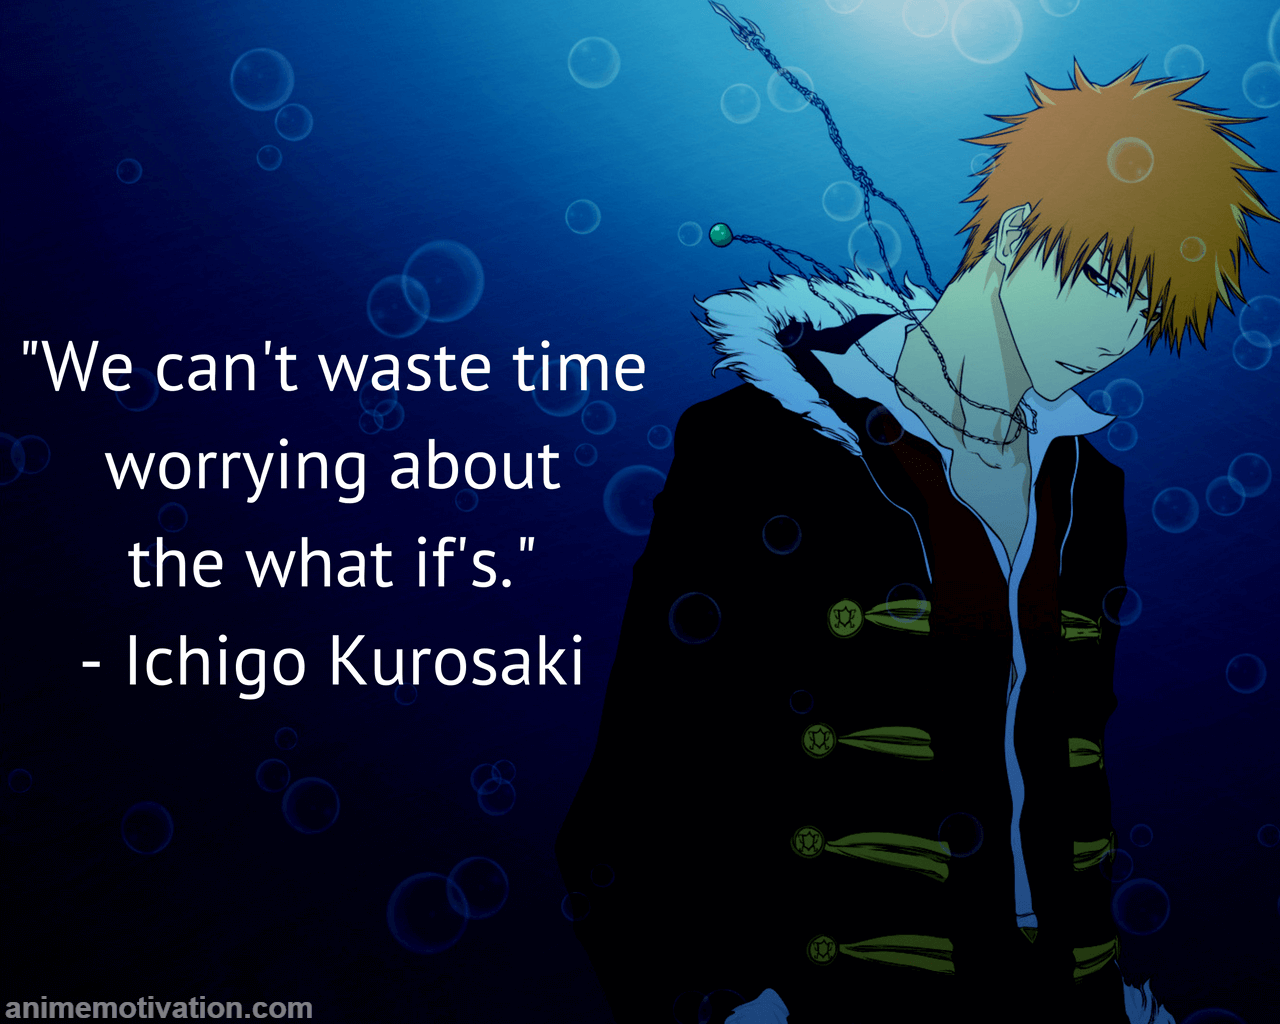 Anime Quote Wallpapers